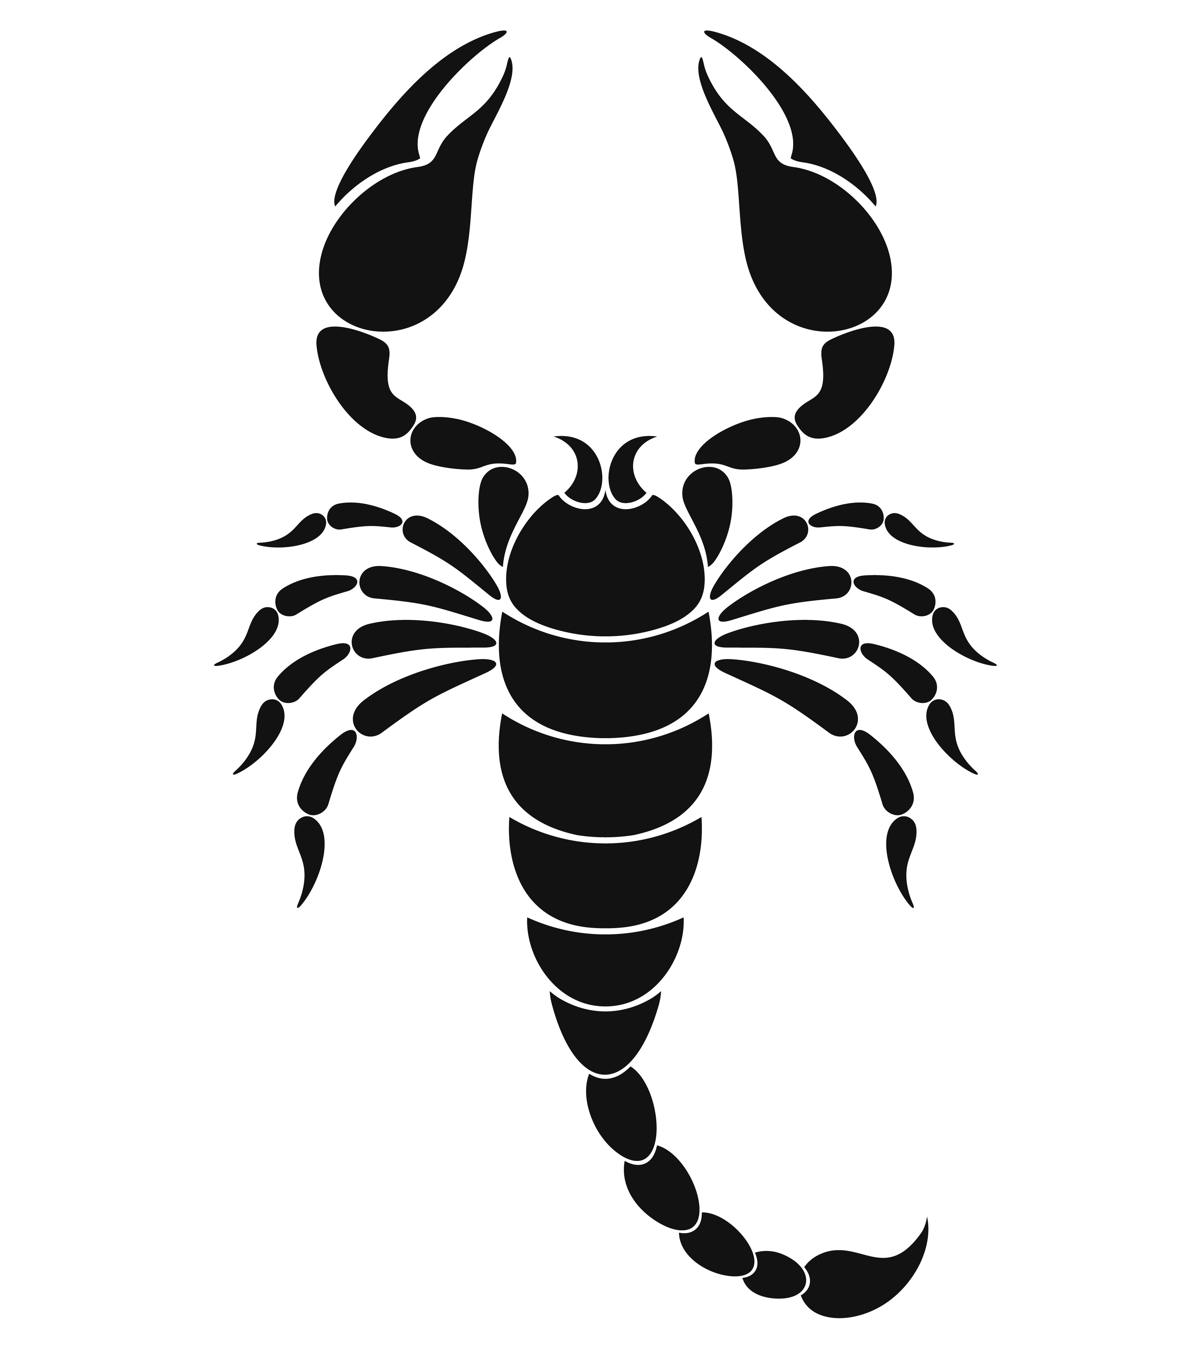 An Impeccable Explanation of the 8 Symbols of a Scorpio Astrology Bay